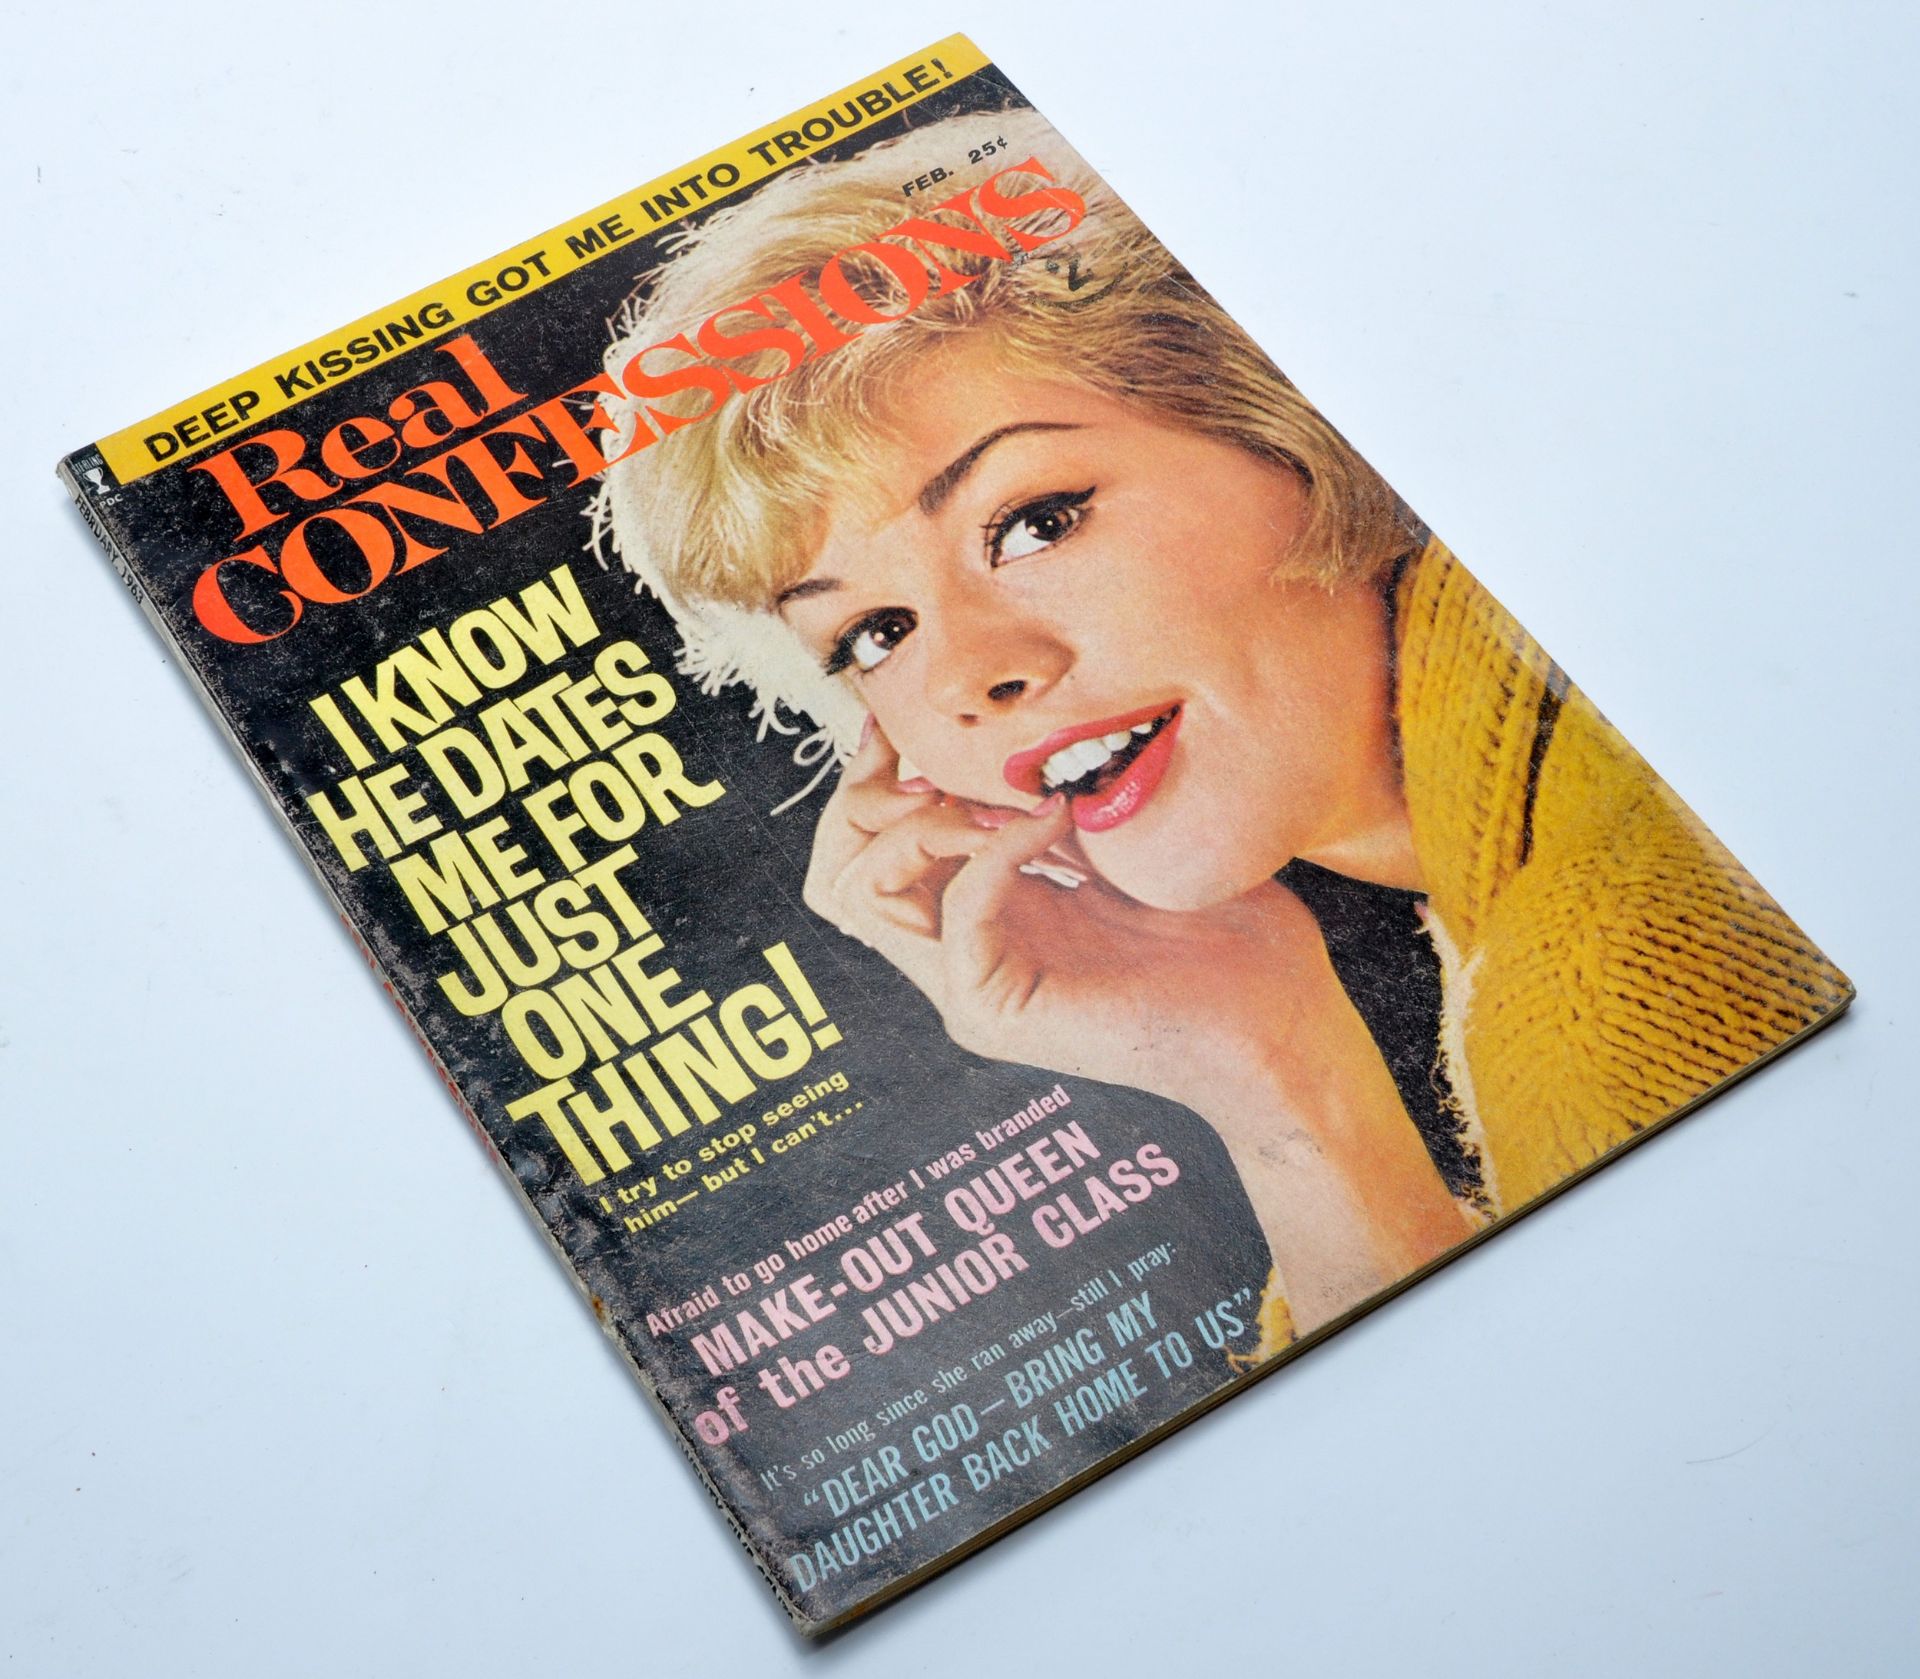 Adult Glamour Magazine / Vintage Erotica, comprising single issue of Real Confessions (1963). Please